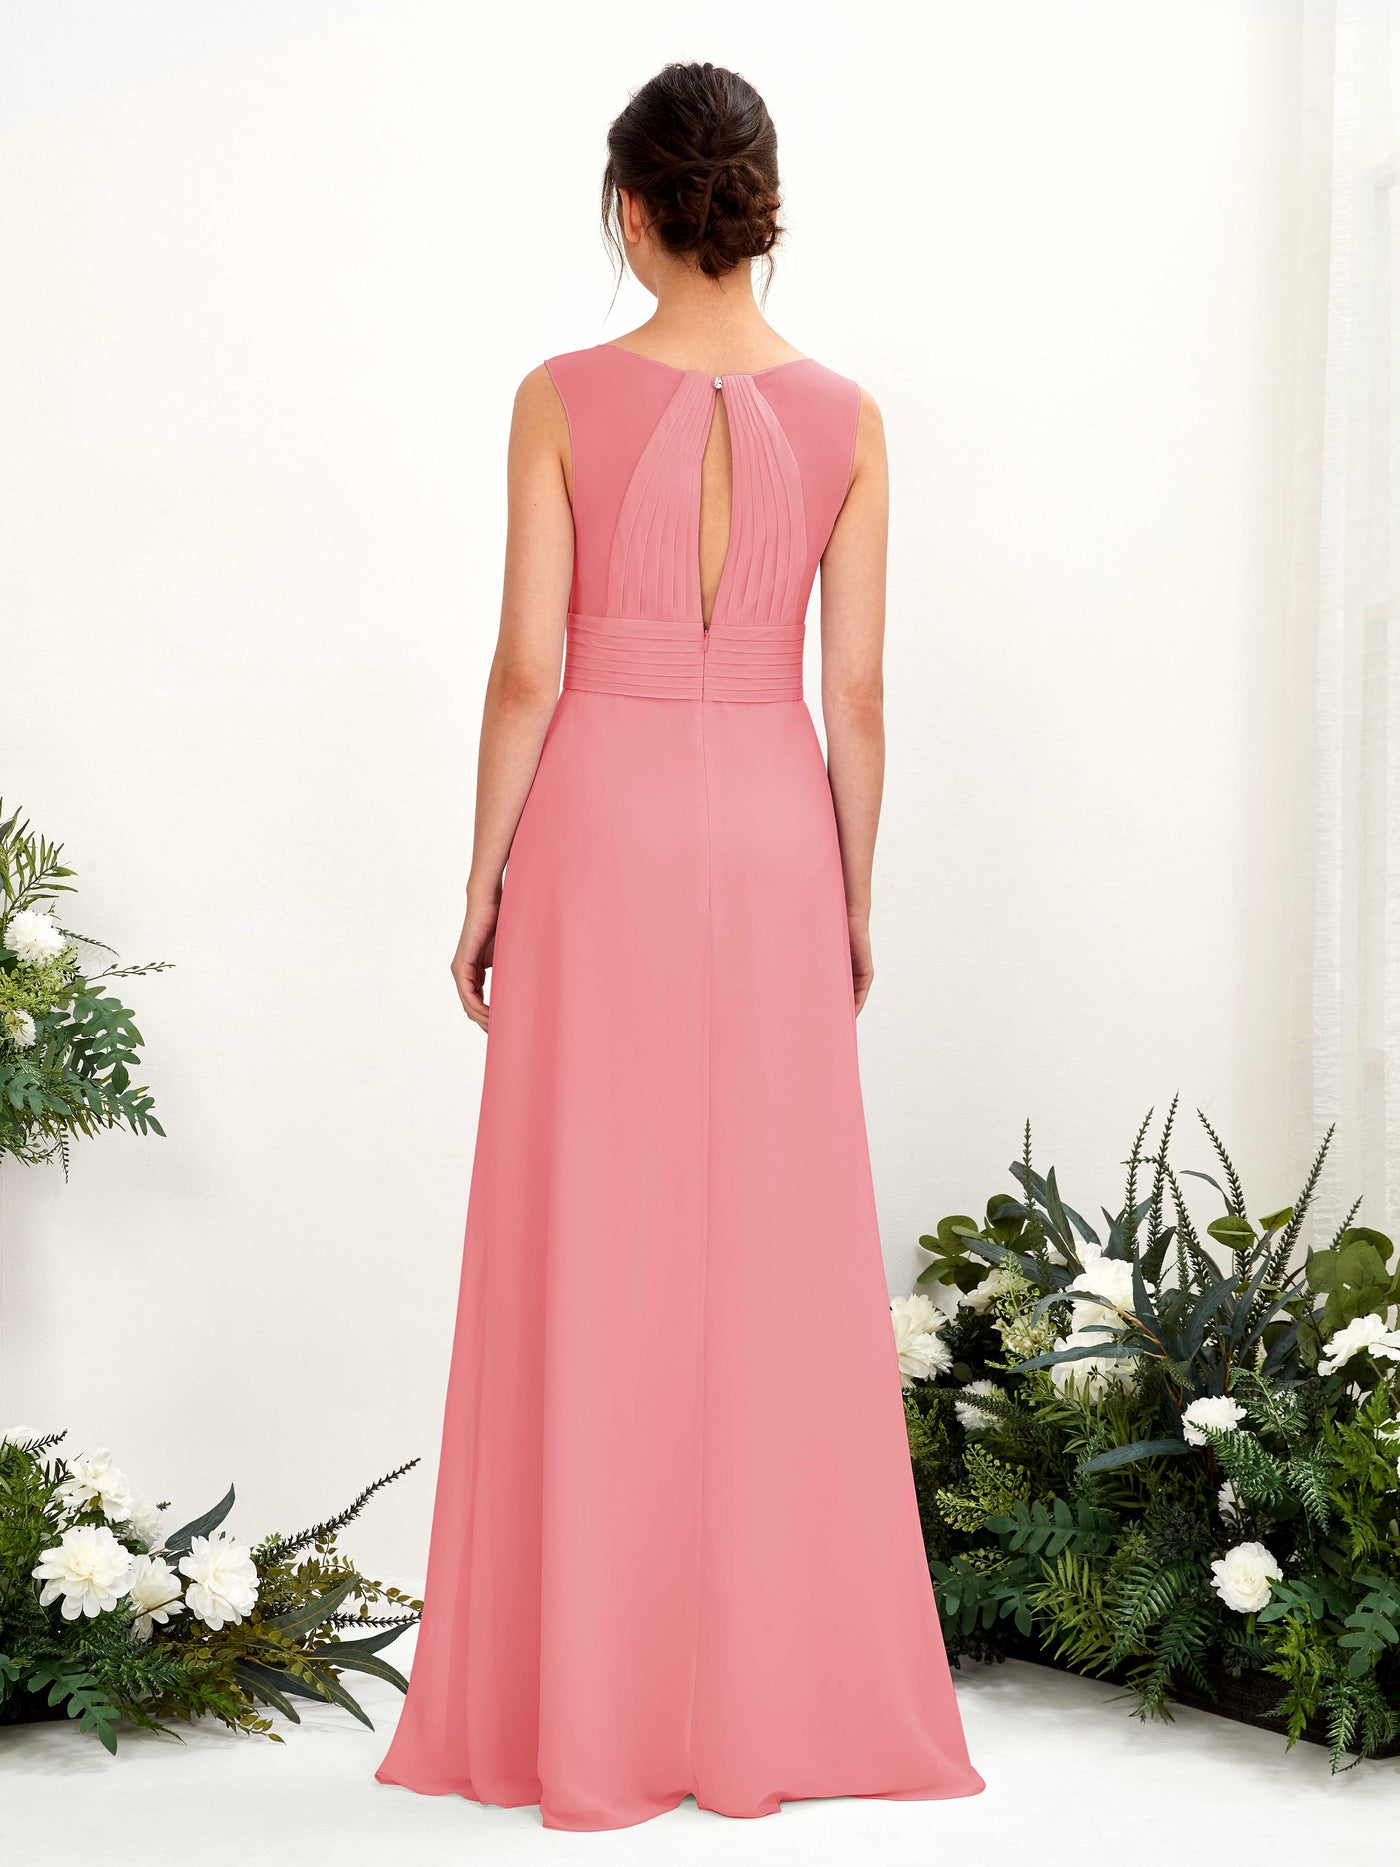 Coral Pink Bridesmaid Dresses Bridesmaid Dress A-line Chiffon Straps Full Length Sleeveless Wedding Party Dress (81220930)#color_coral-pink